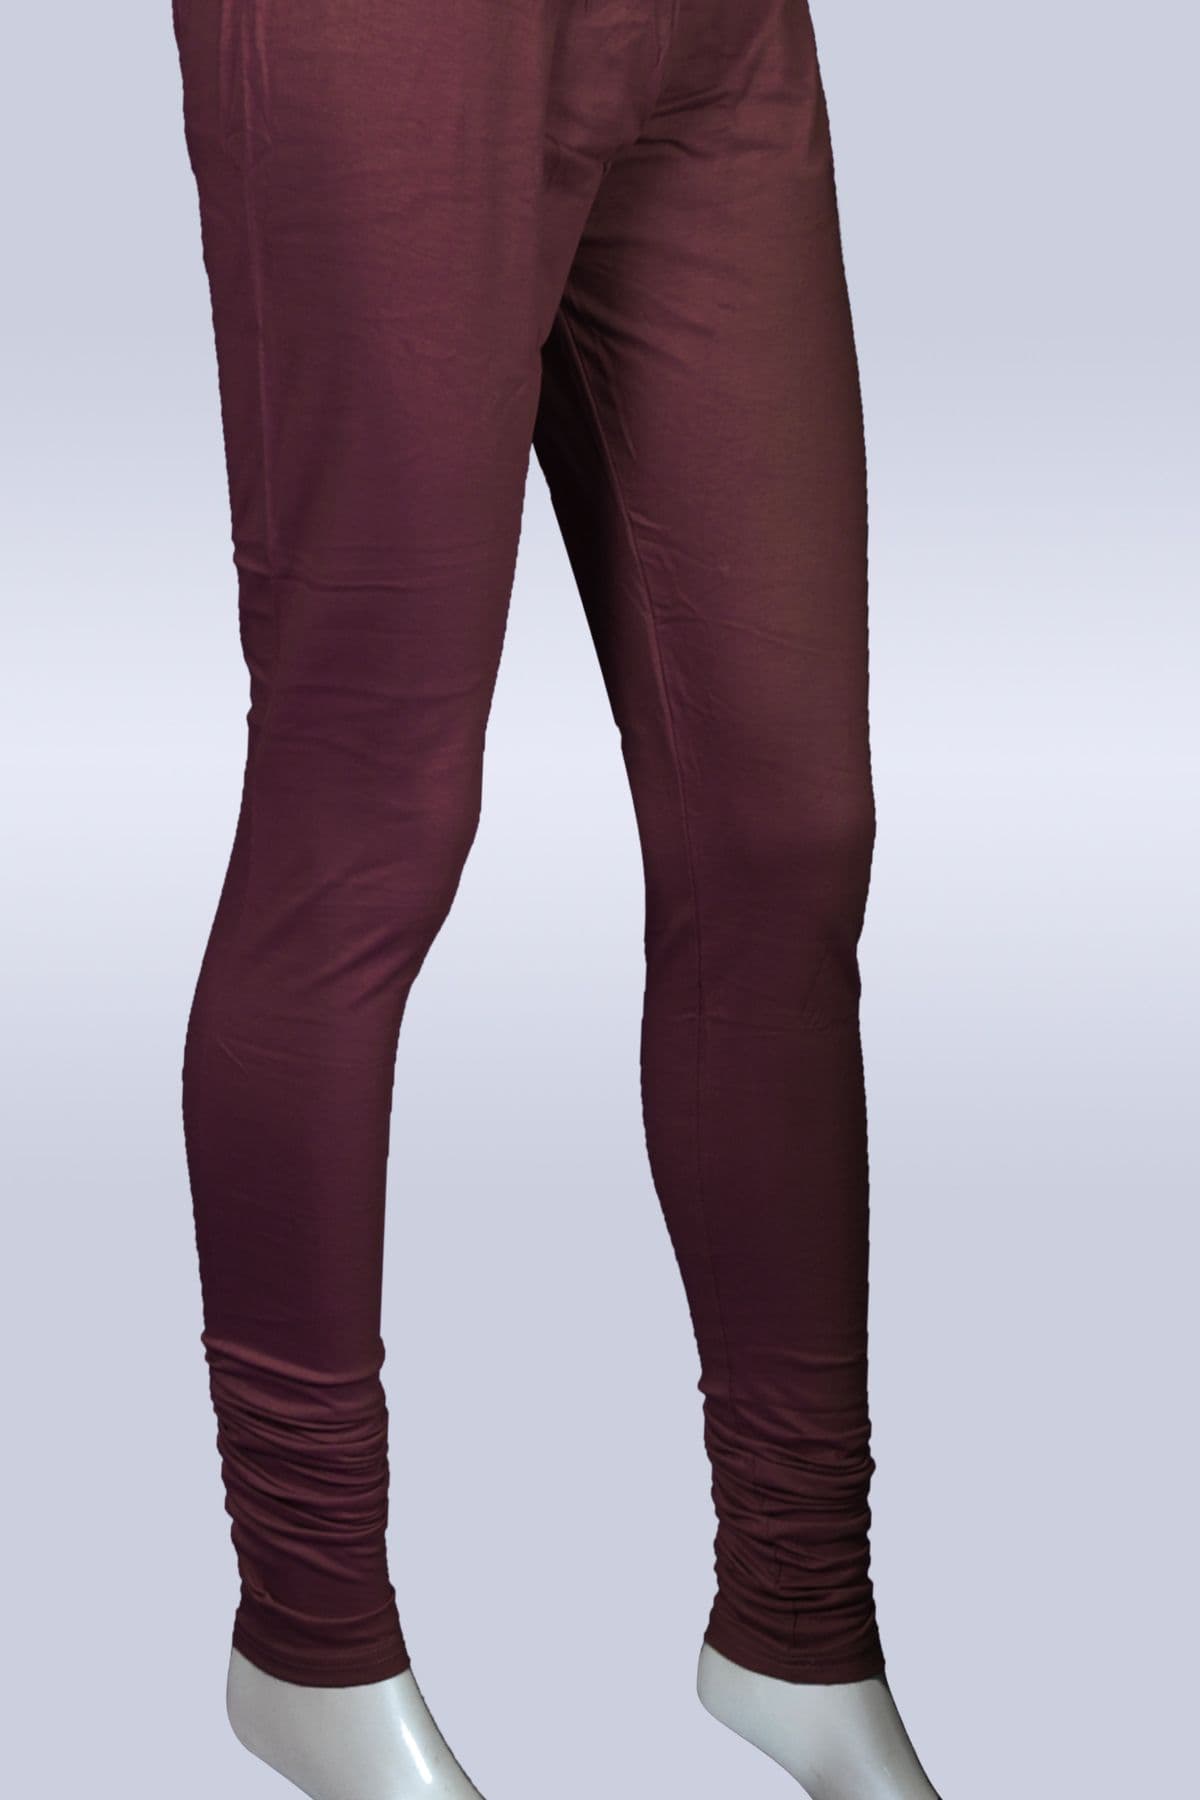 Color Candy Chocolate Color Women's Leggings